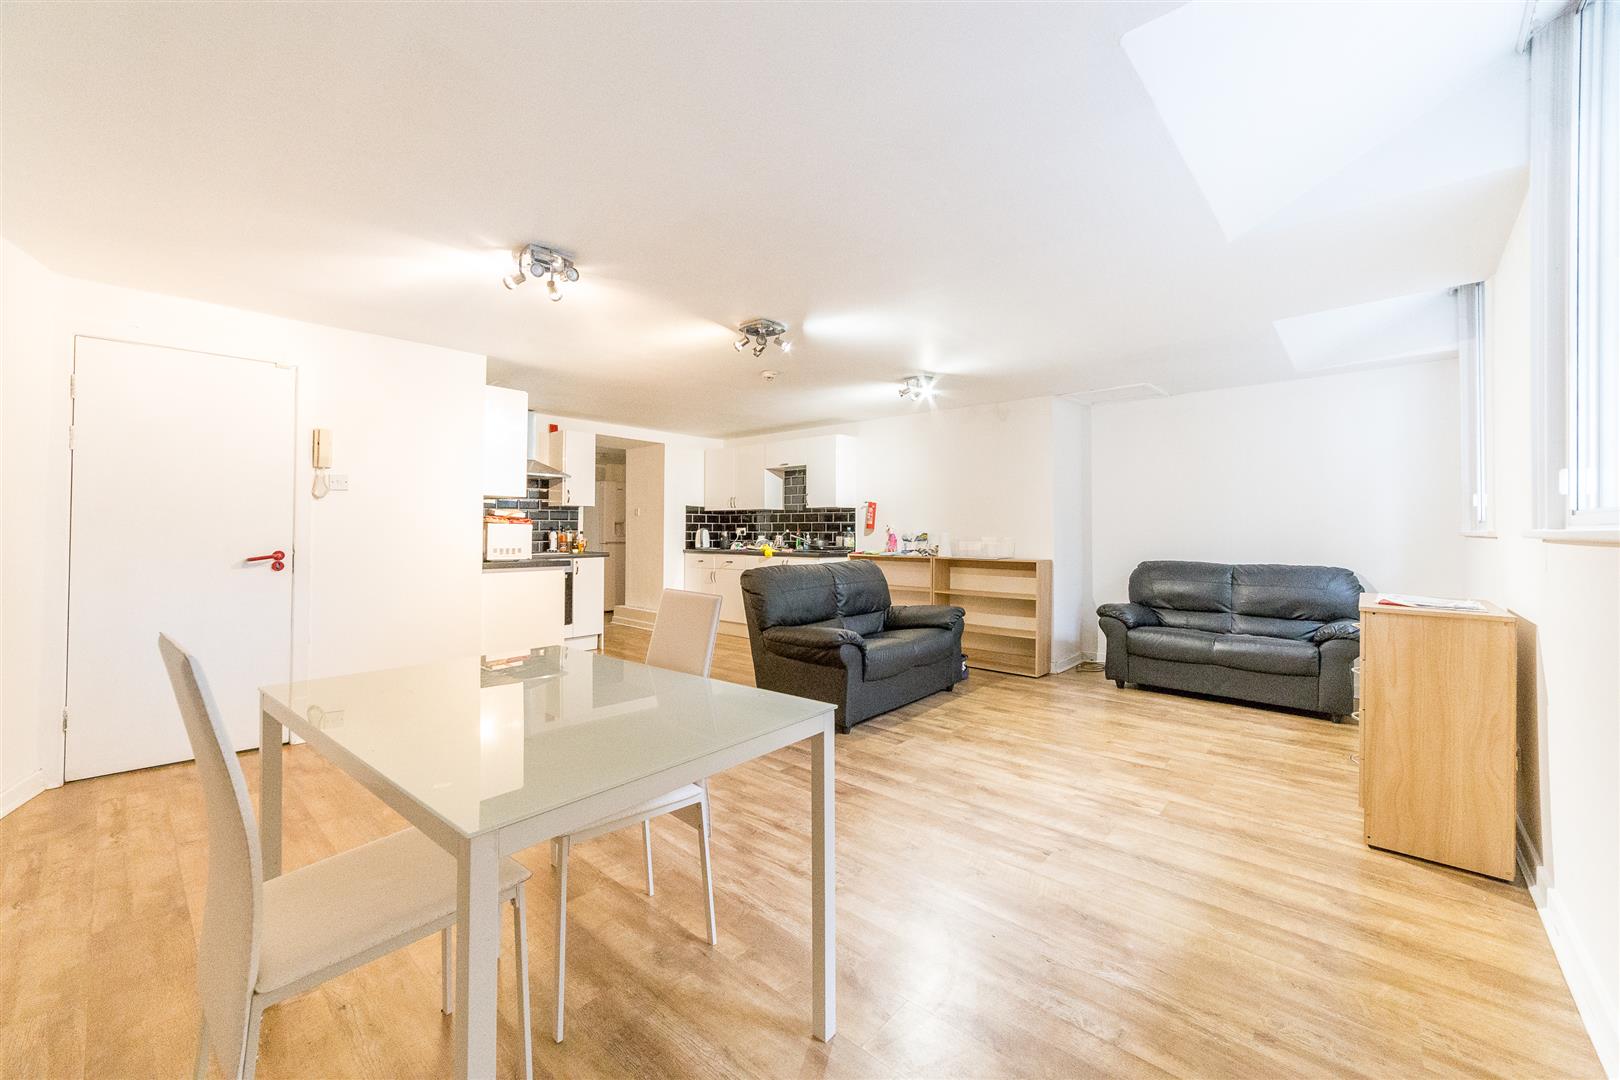 2 bed apartment to rent in Clayton Street West, Newcastle Upon Tyne, NE1 